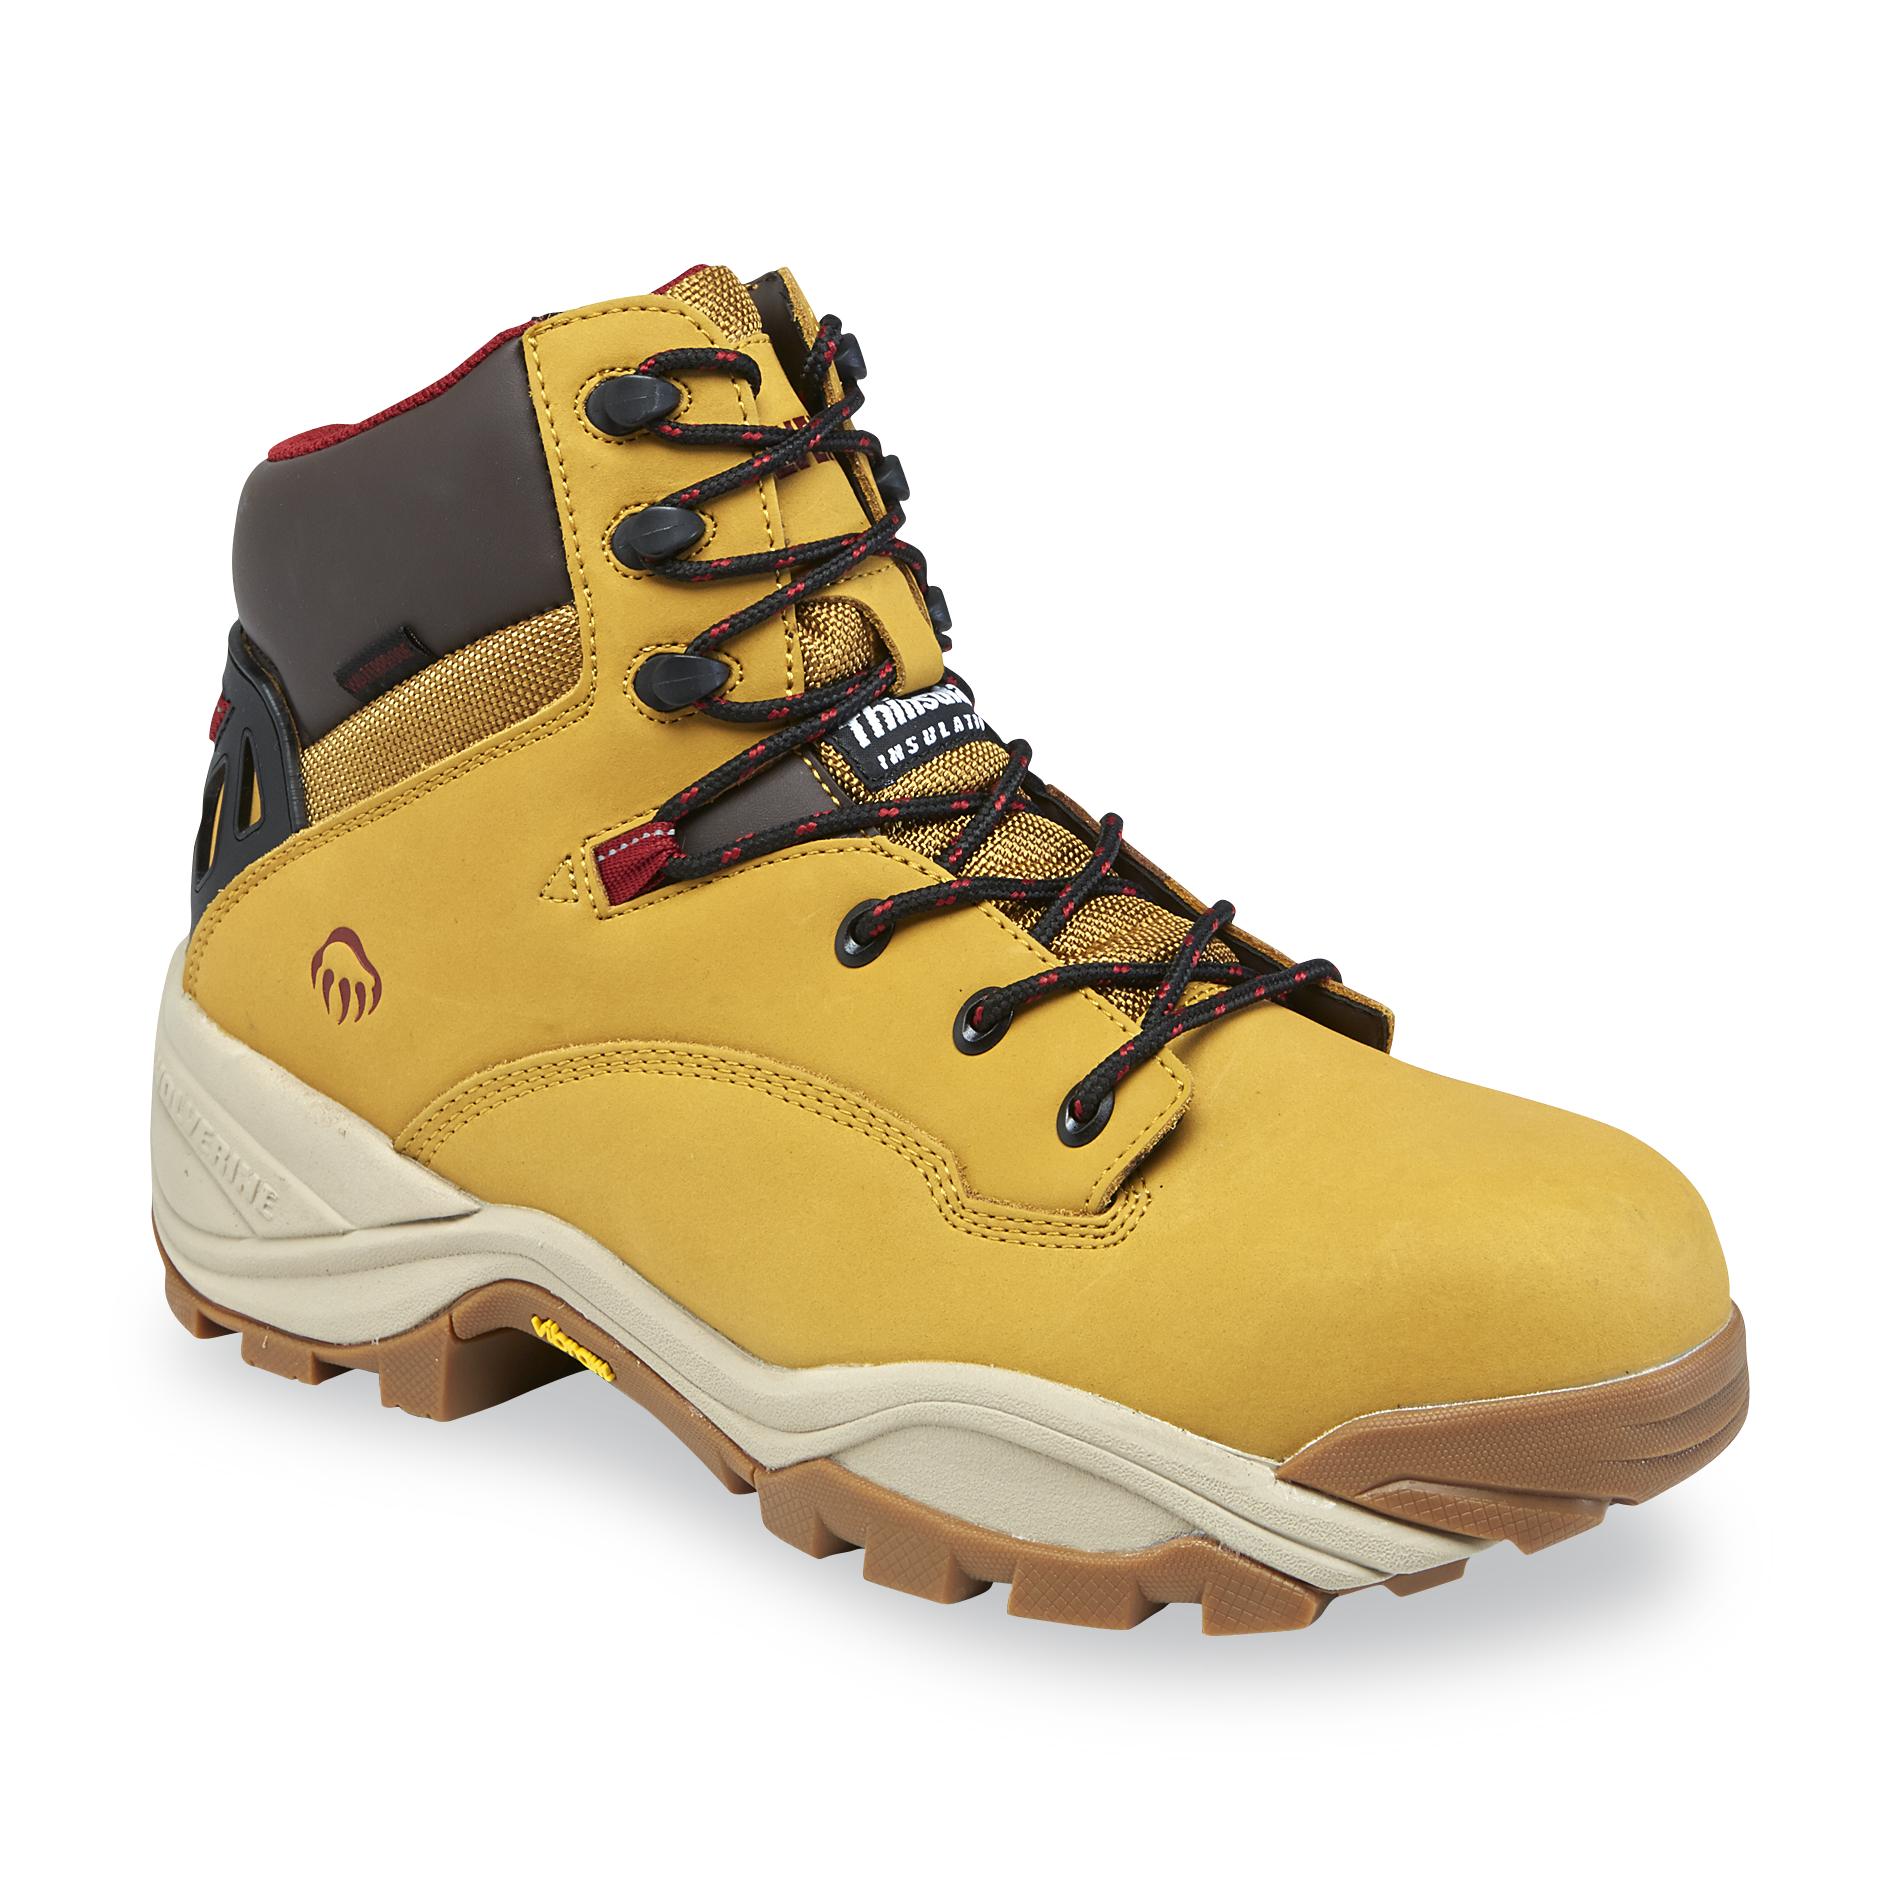 Wolverine Men's Growler LX Wheat Composite Toe Work Boot - Wide Width Available